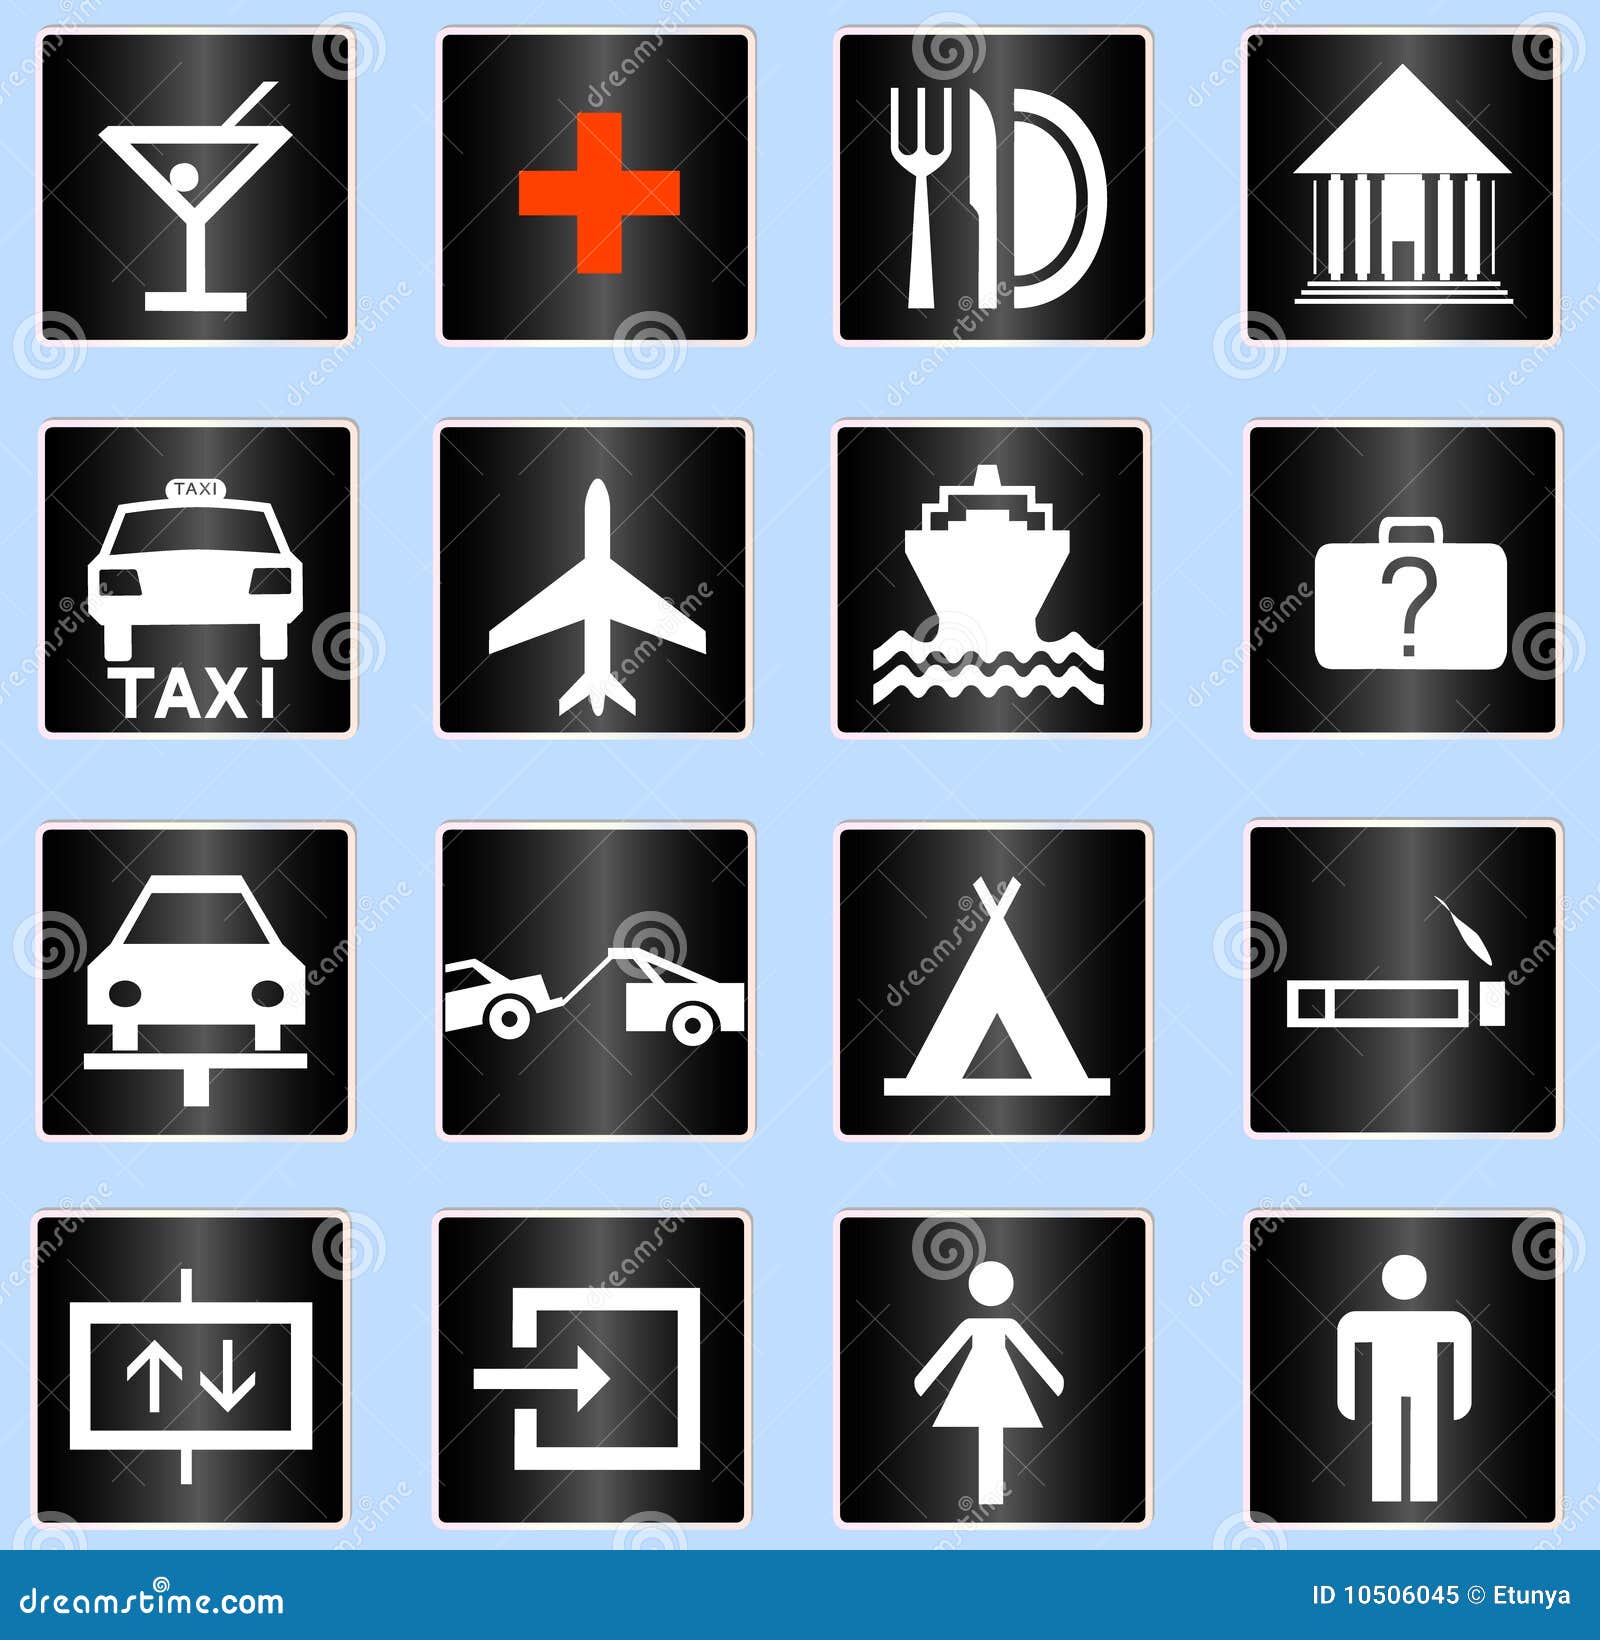 royalty free pictograms